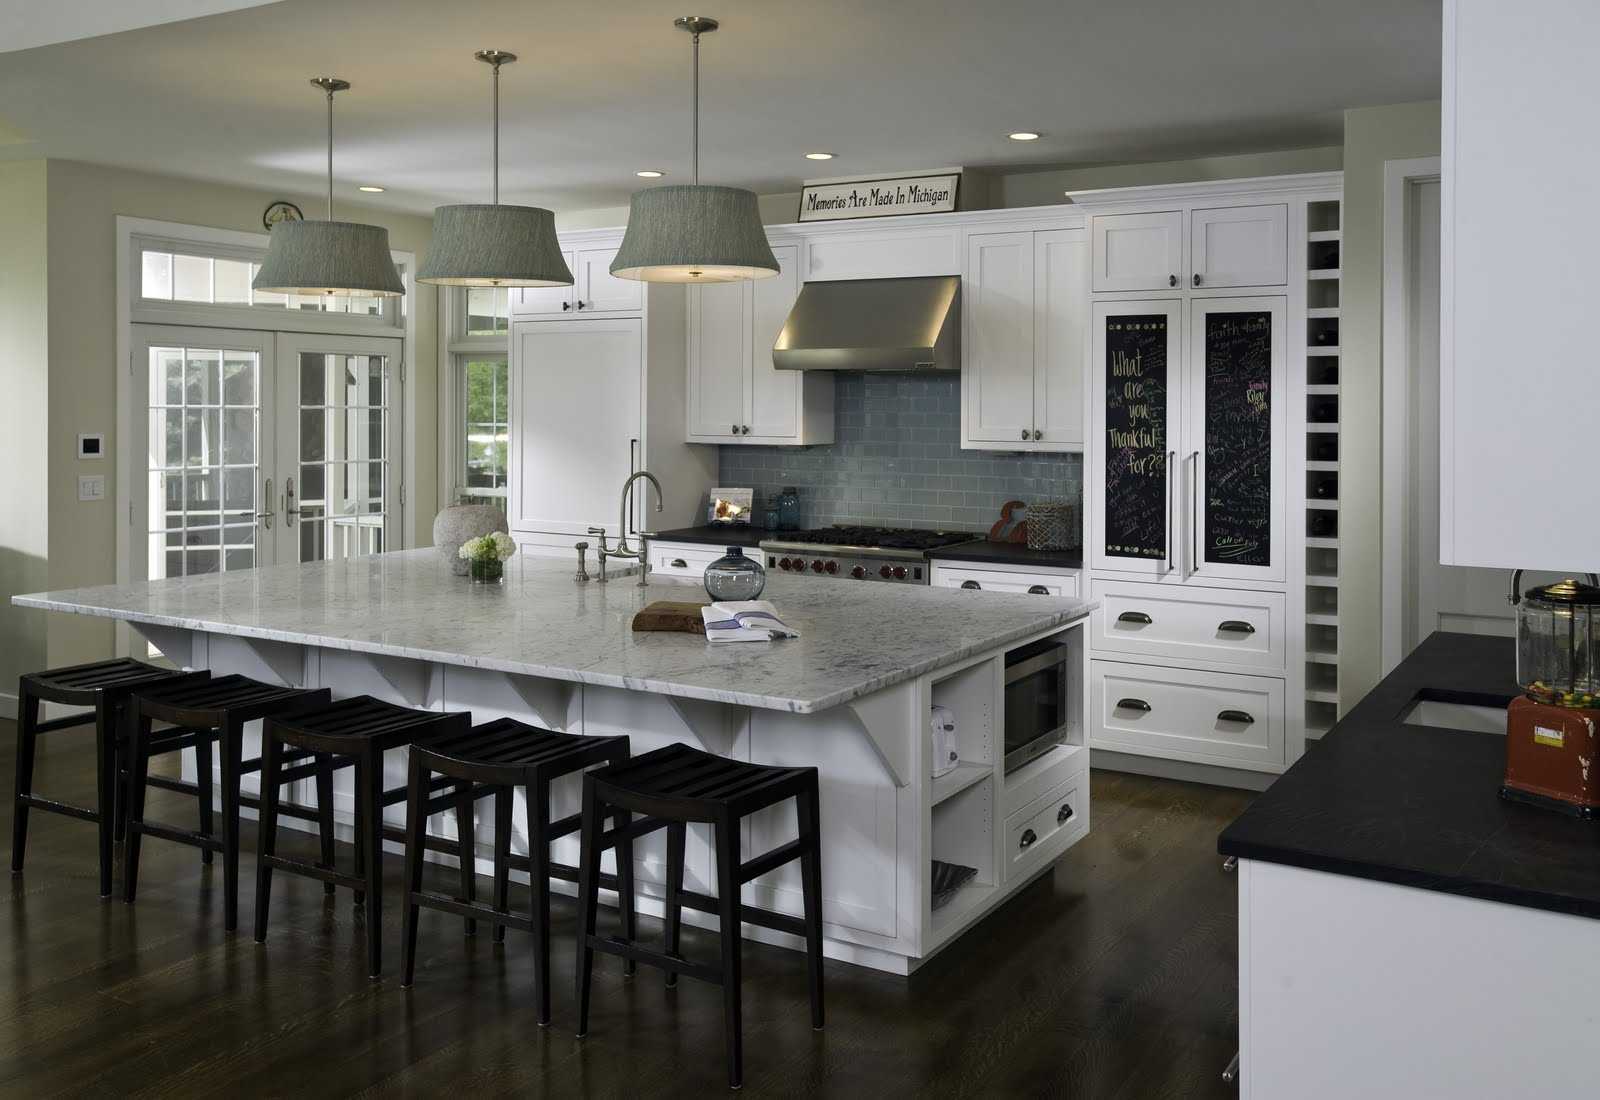 large kitchen islands with seating and storage large kitchen islands with ideas fabulous island seating and storage UDMDGKD